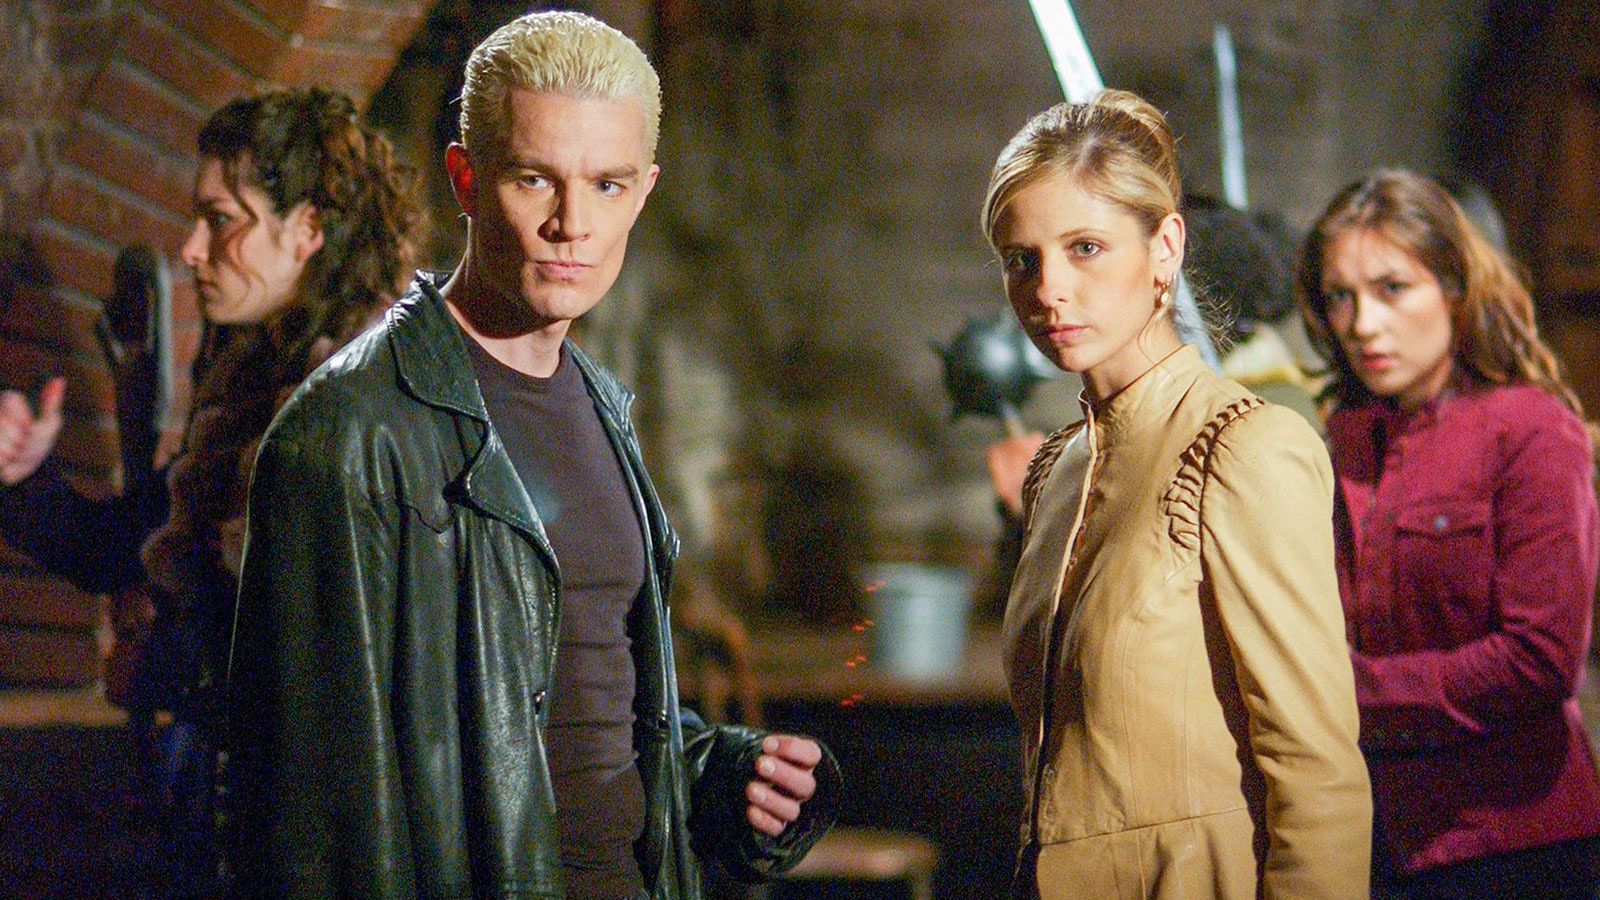 A Buffy The Vampire Slayer Spin-Off Audio Series About Spike Is